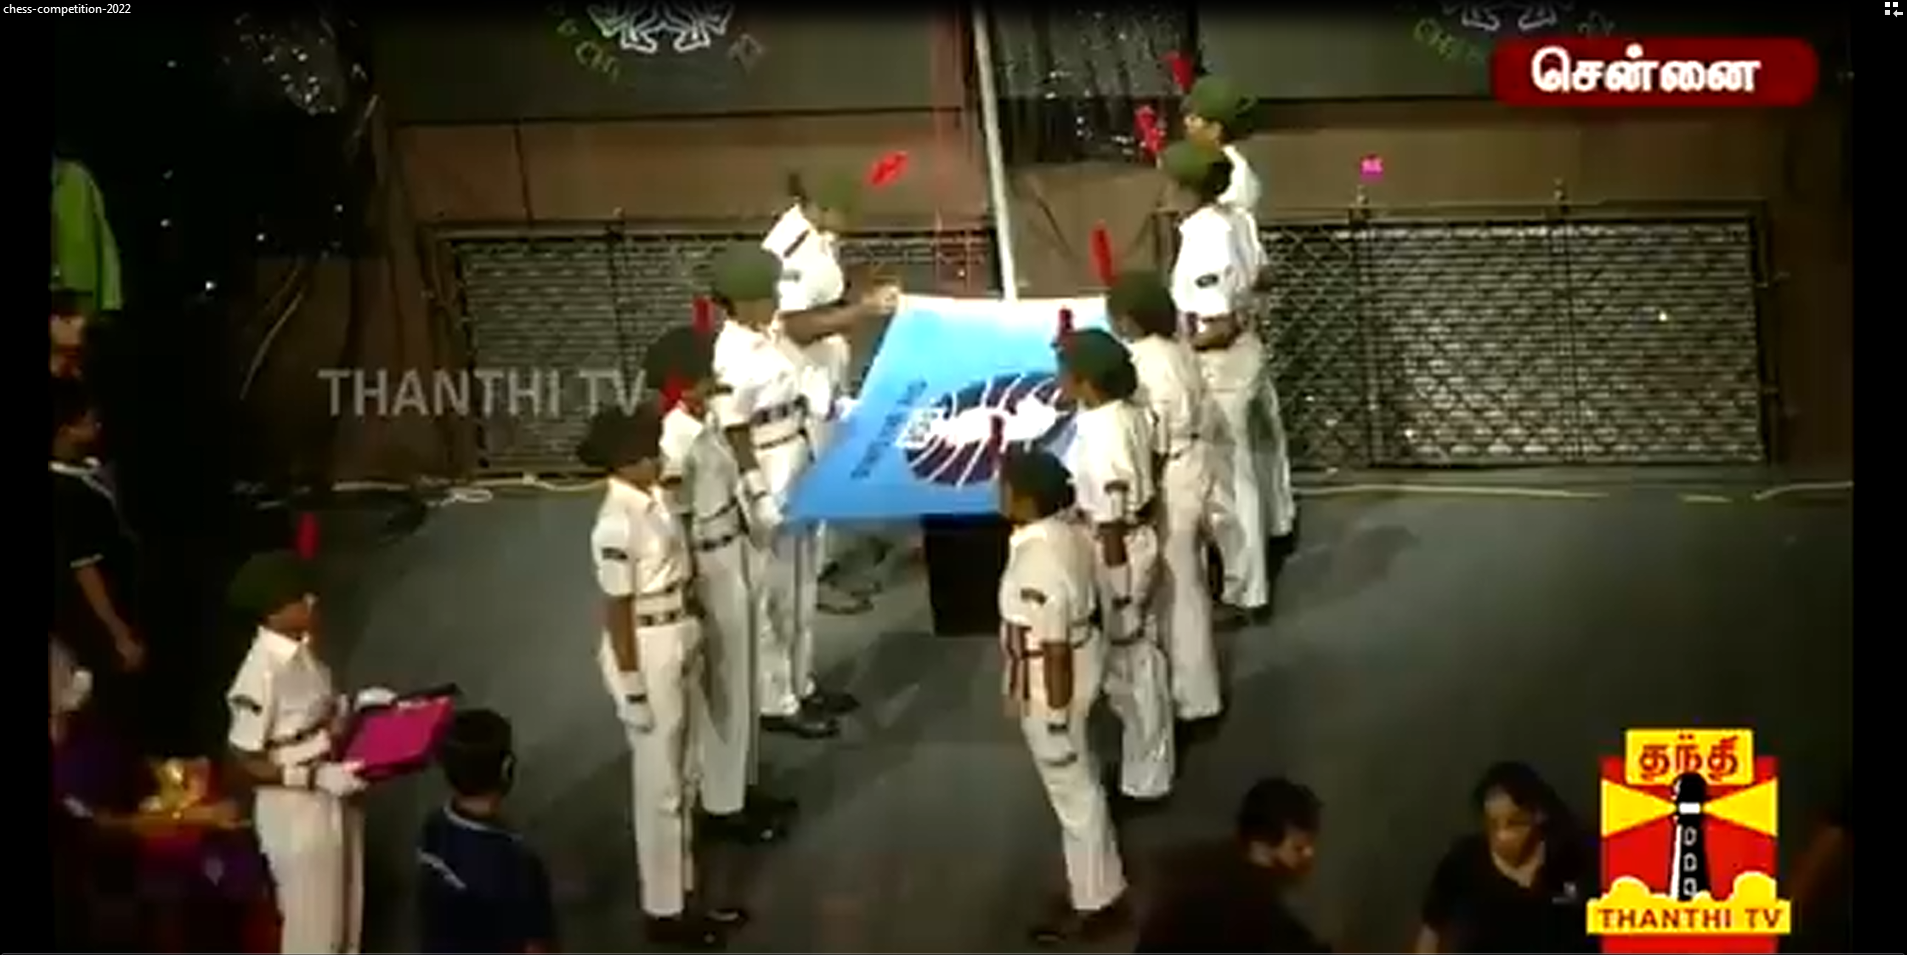 NCC NAVAL WING CADETS in flag handing over ceremony. Chess olympiad 2022.